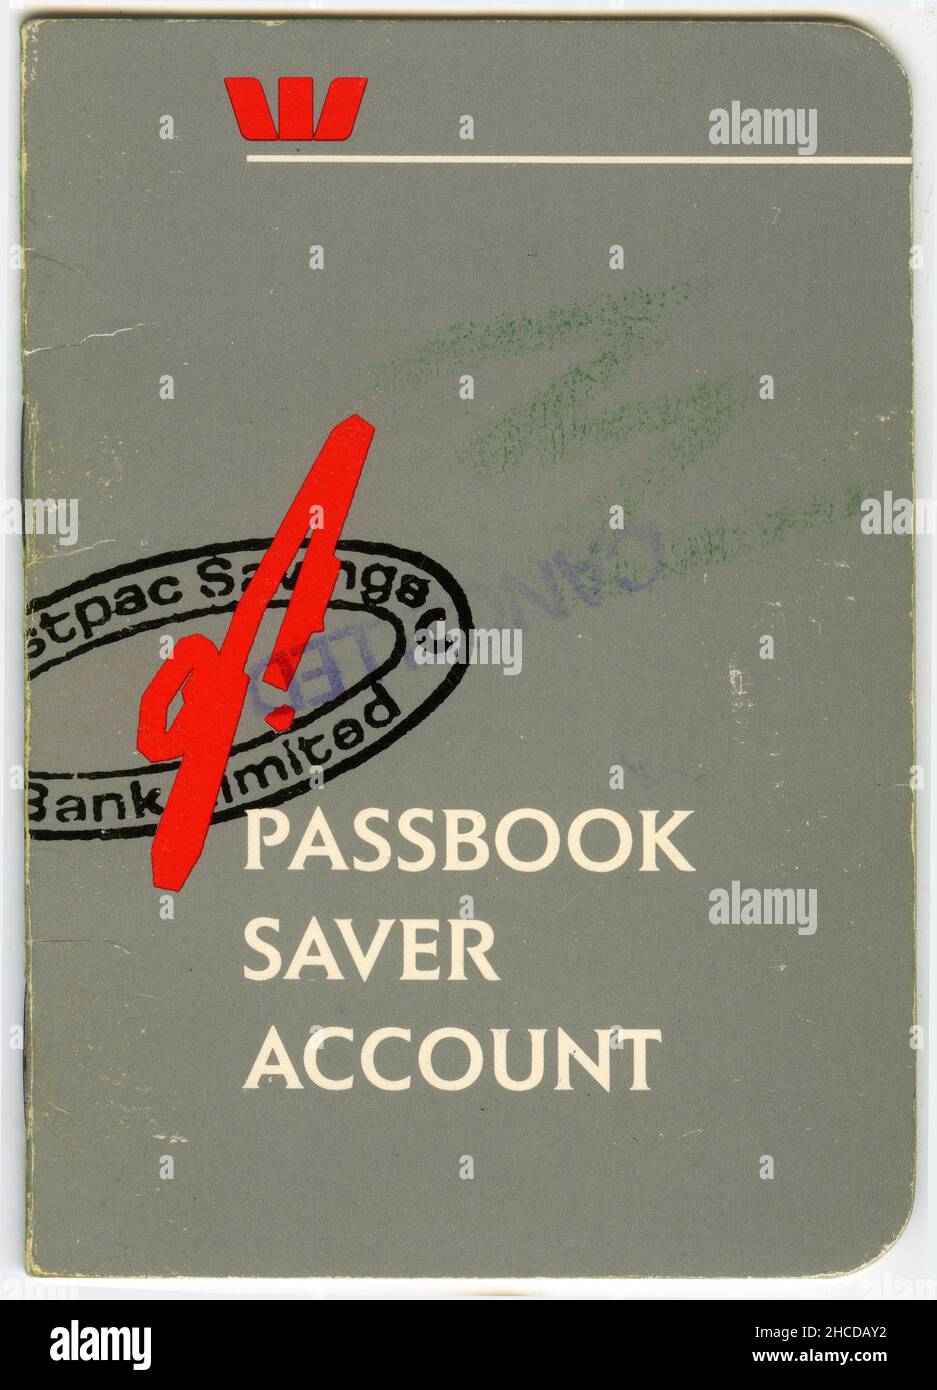 1980's design for a Westpac Bank Passbook Saver Account in Australia Stock Photo